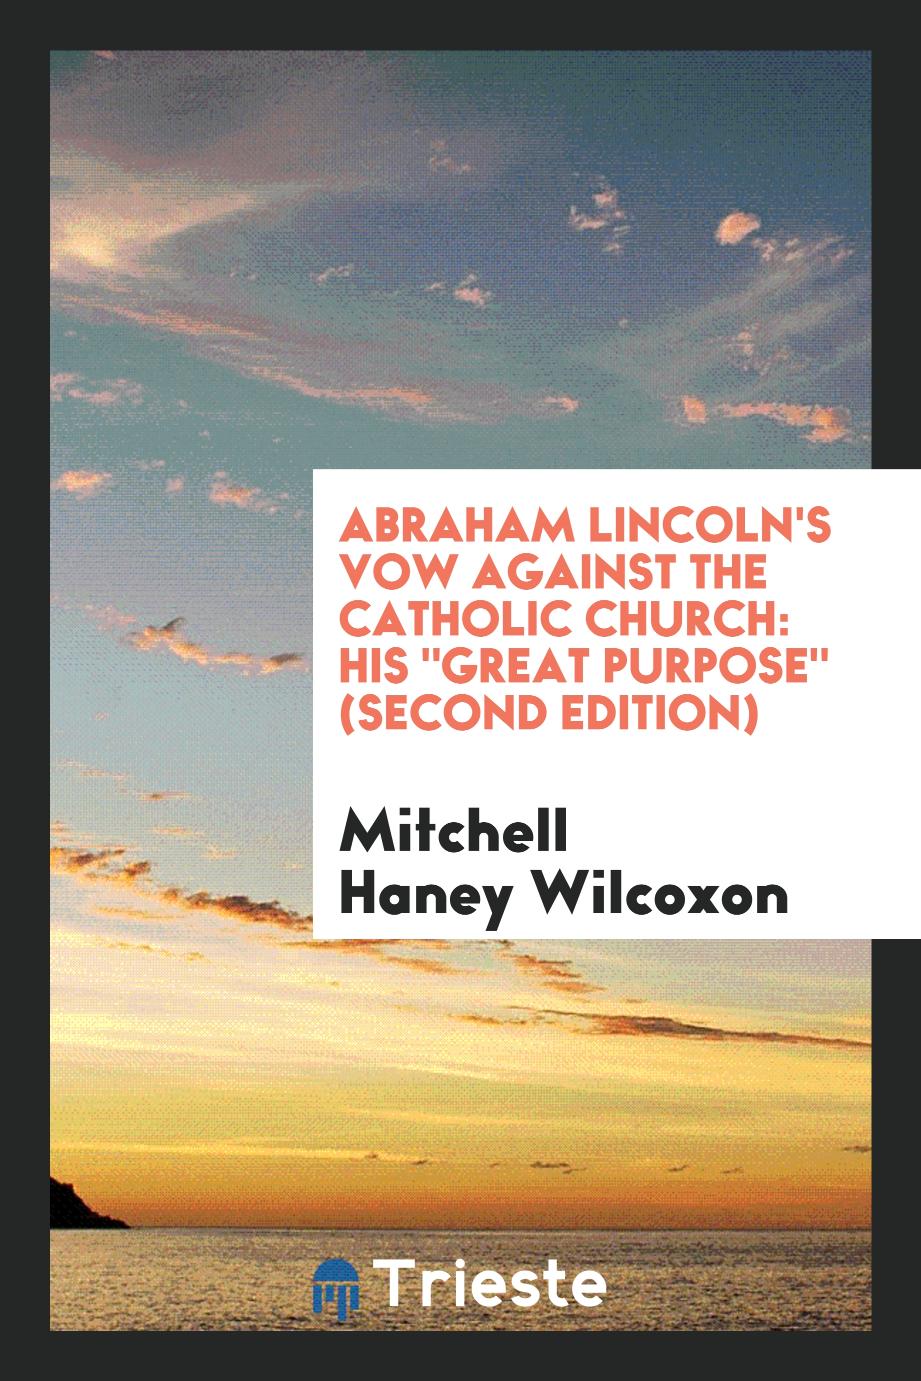 Abraham Lincoln's Vow Against the Catholic Church: His "Great Purpose" (Second Edition)